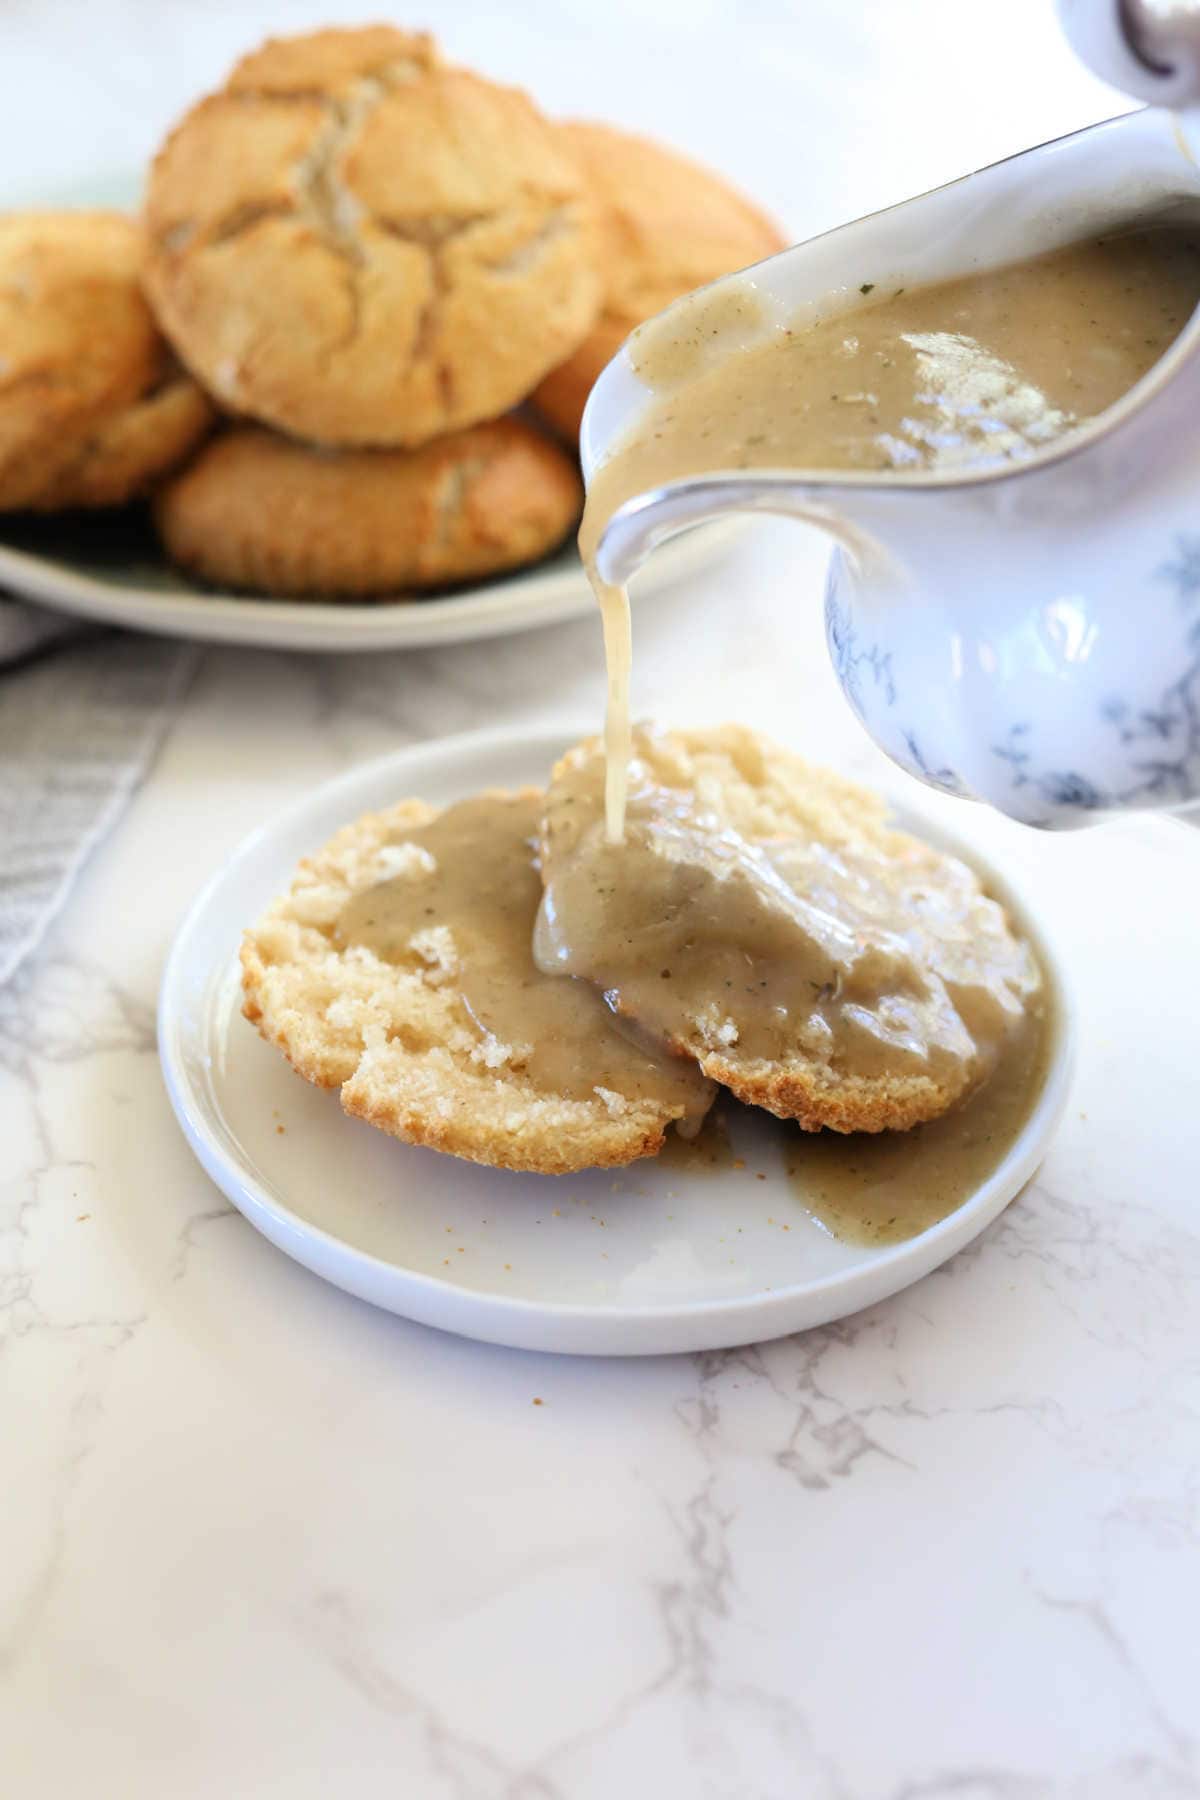 Pouring paleo gravy on dairy-free biscuits.